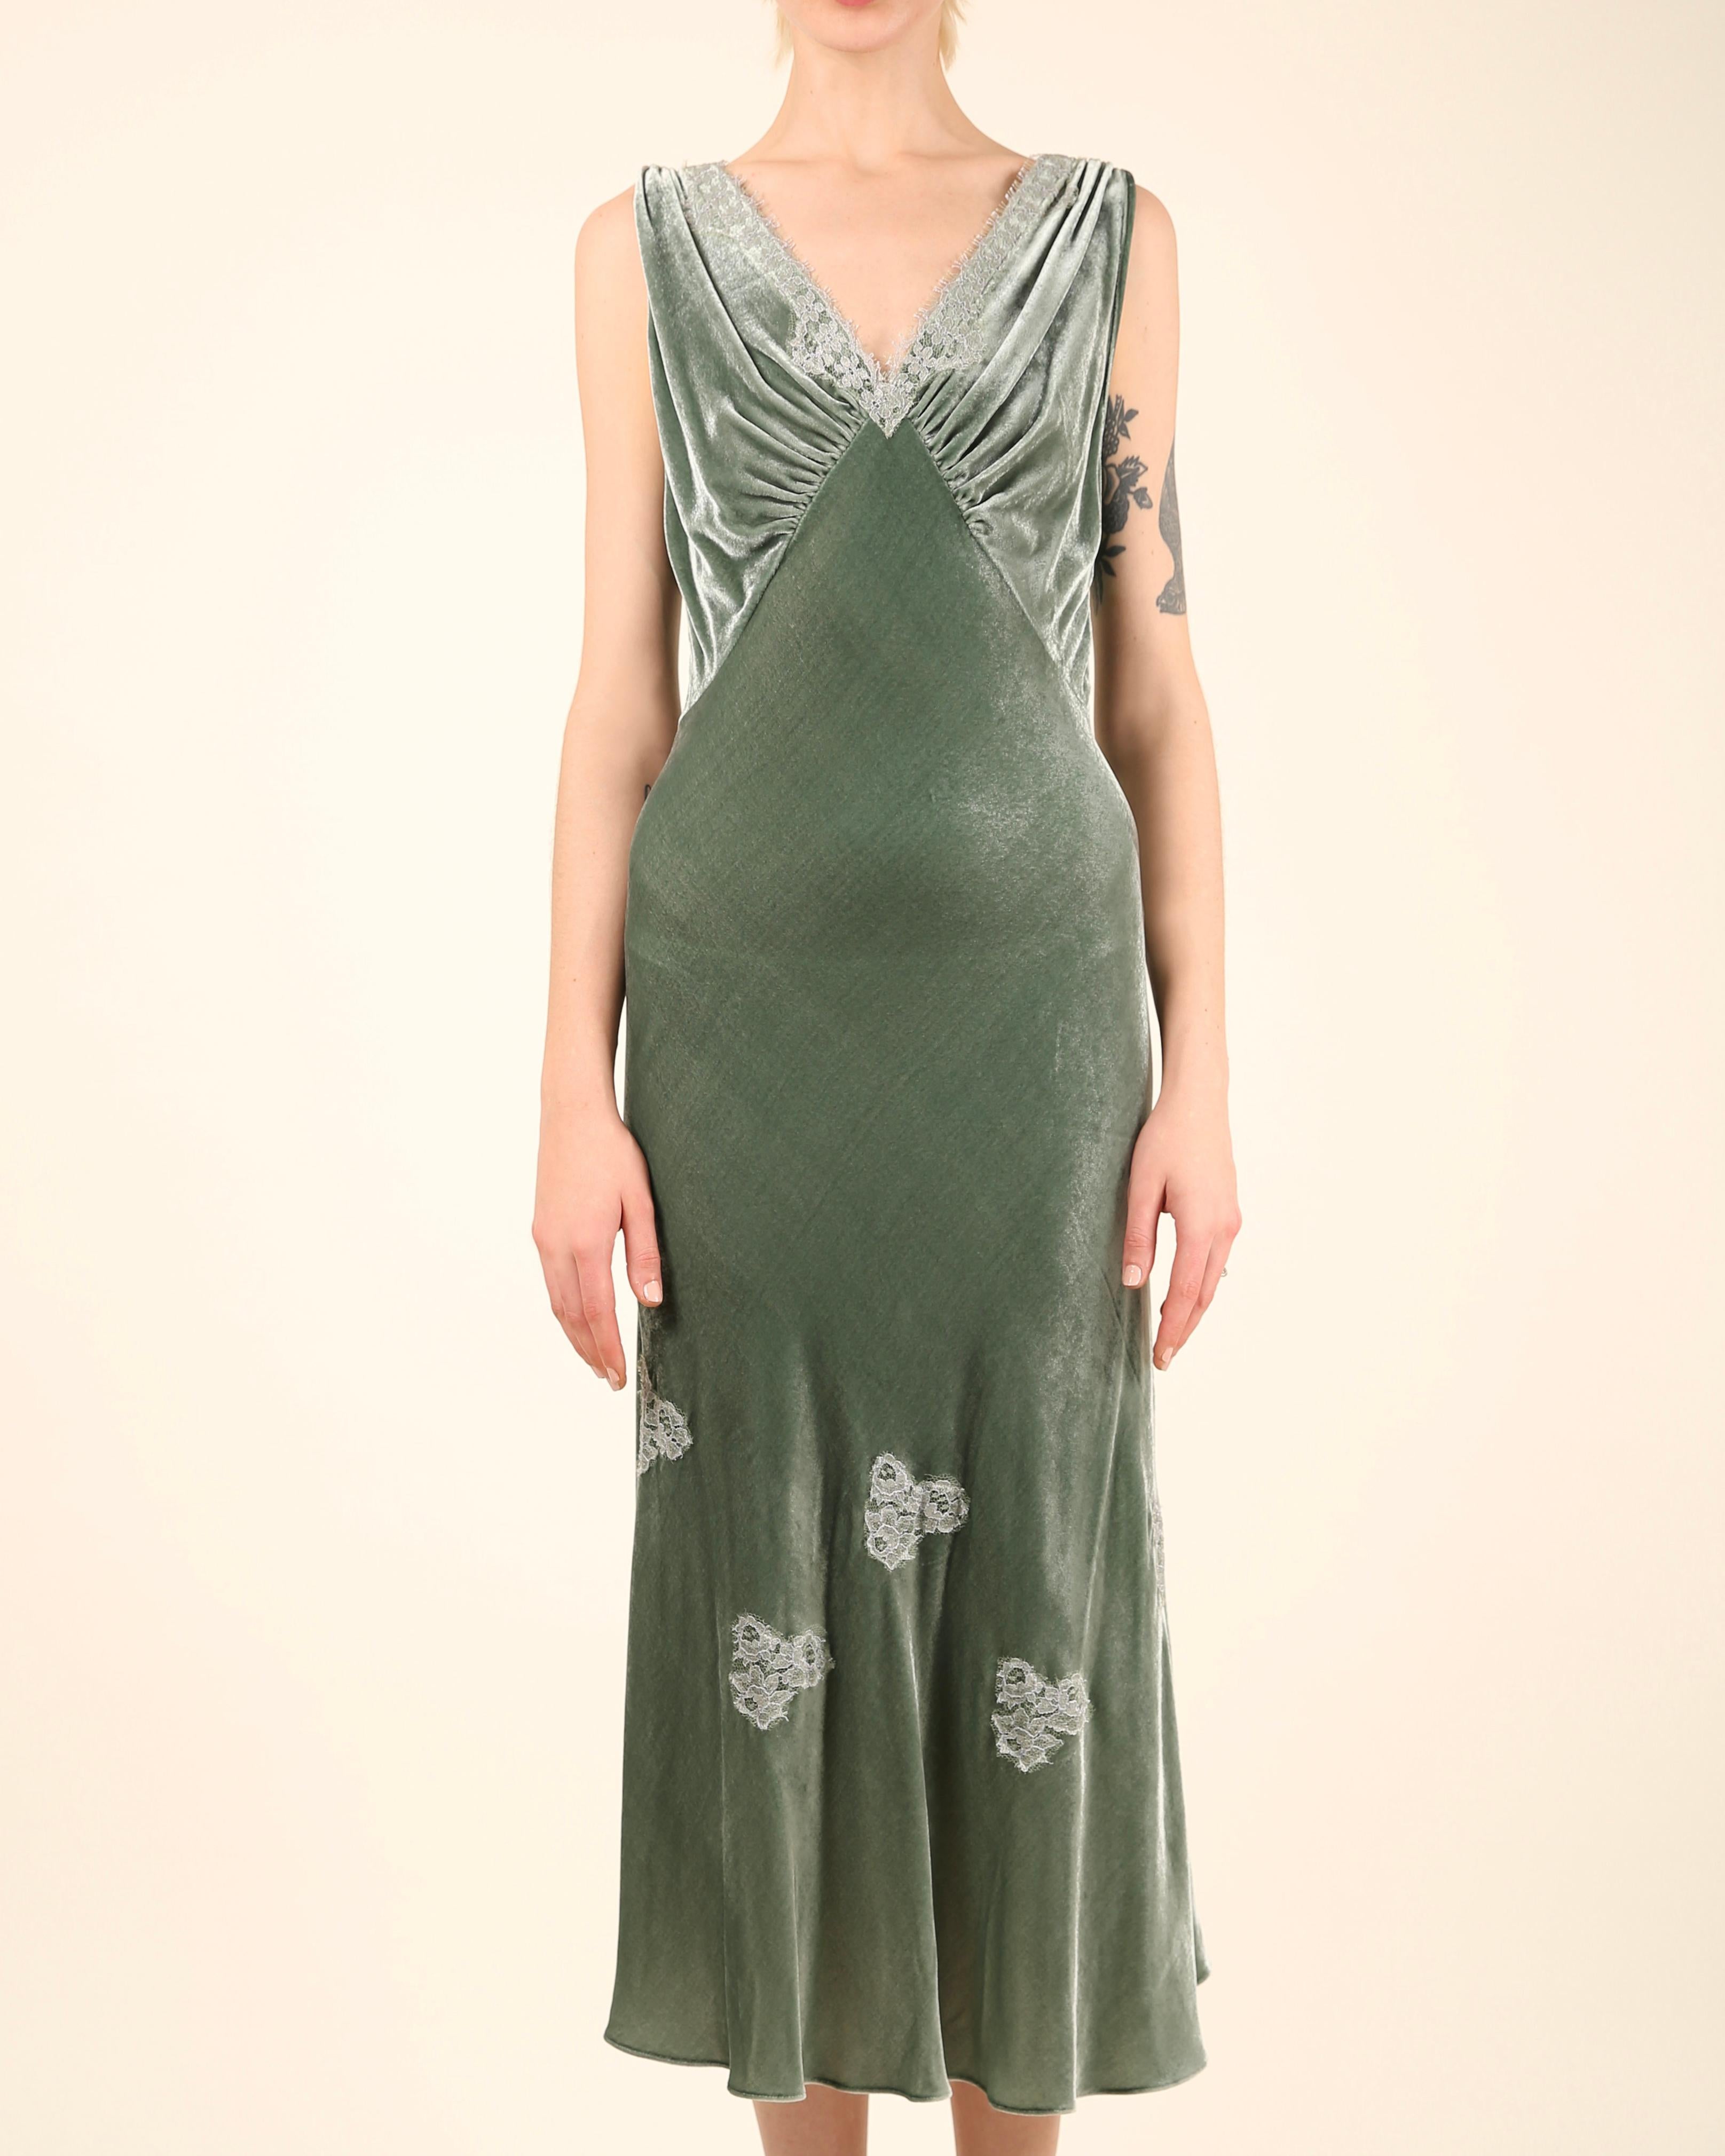 LOVE LALI Vintage

A lovely sleeveless midi length dress by Louis Beccaria in a shade of muted sea foam green velvet 
It has beautiful lace trim in silver lurex to the V neckline and very low V back, as well as little areas of lace detail to the